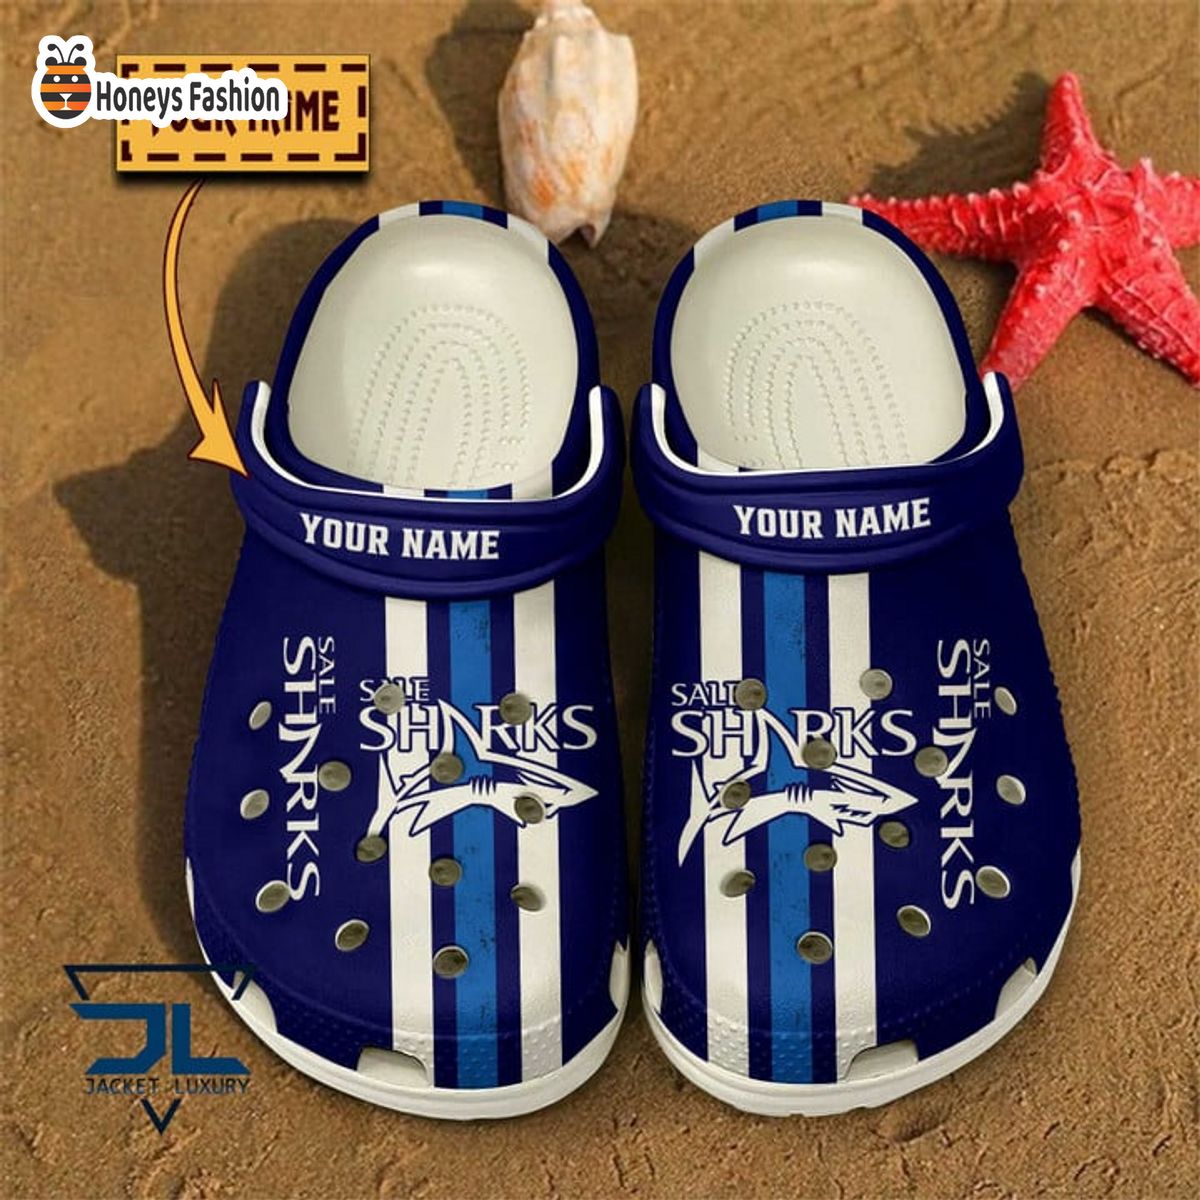 Sale Sharks Personalized Rugby Classic Crocs